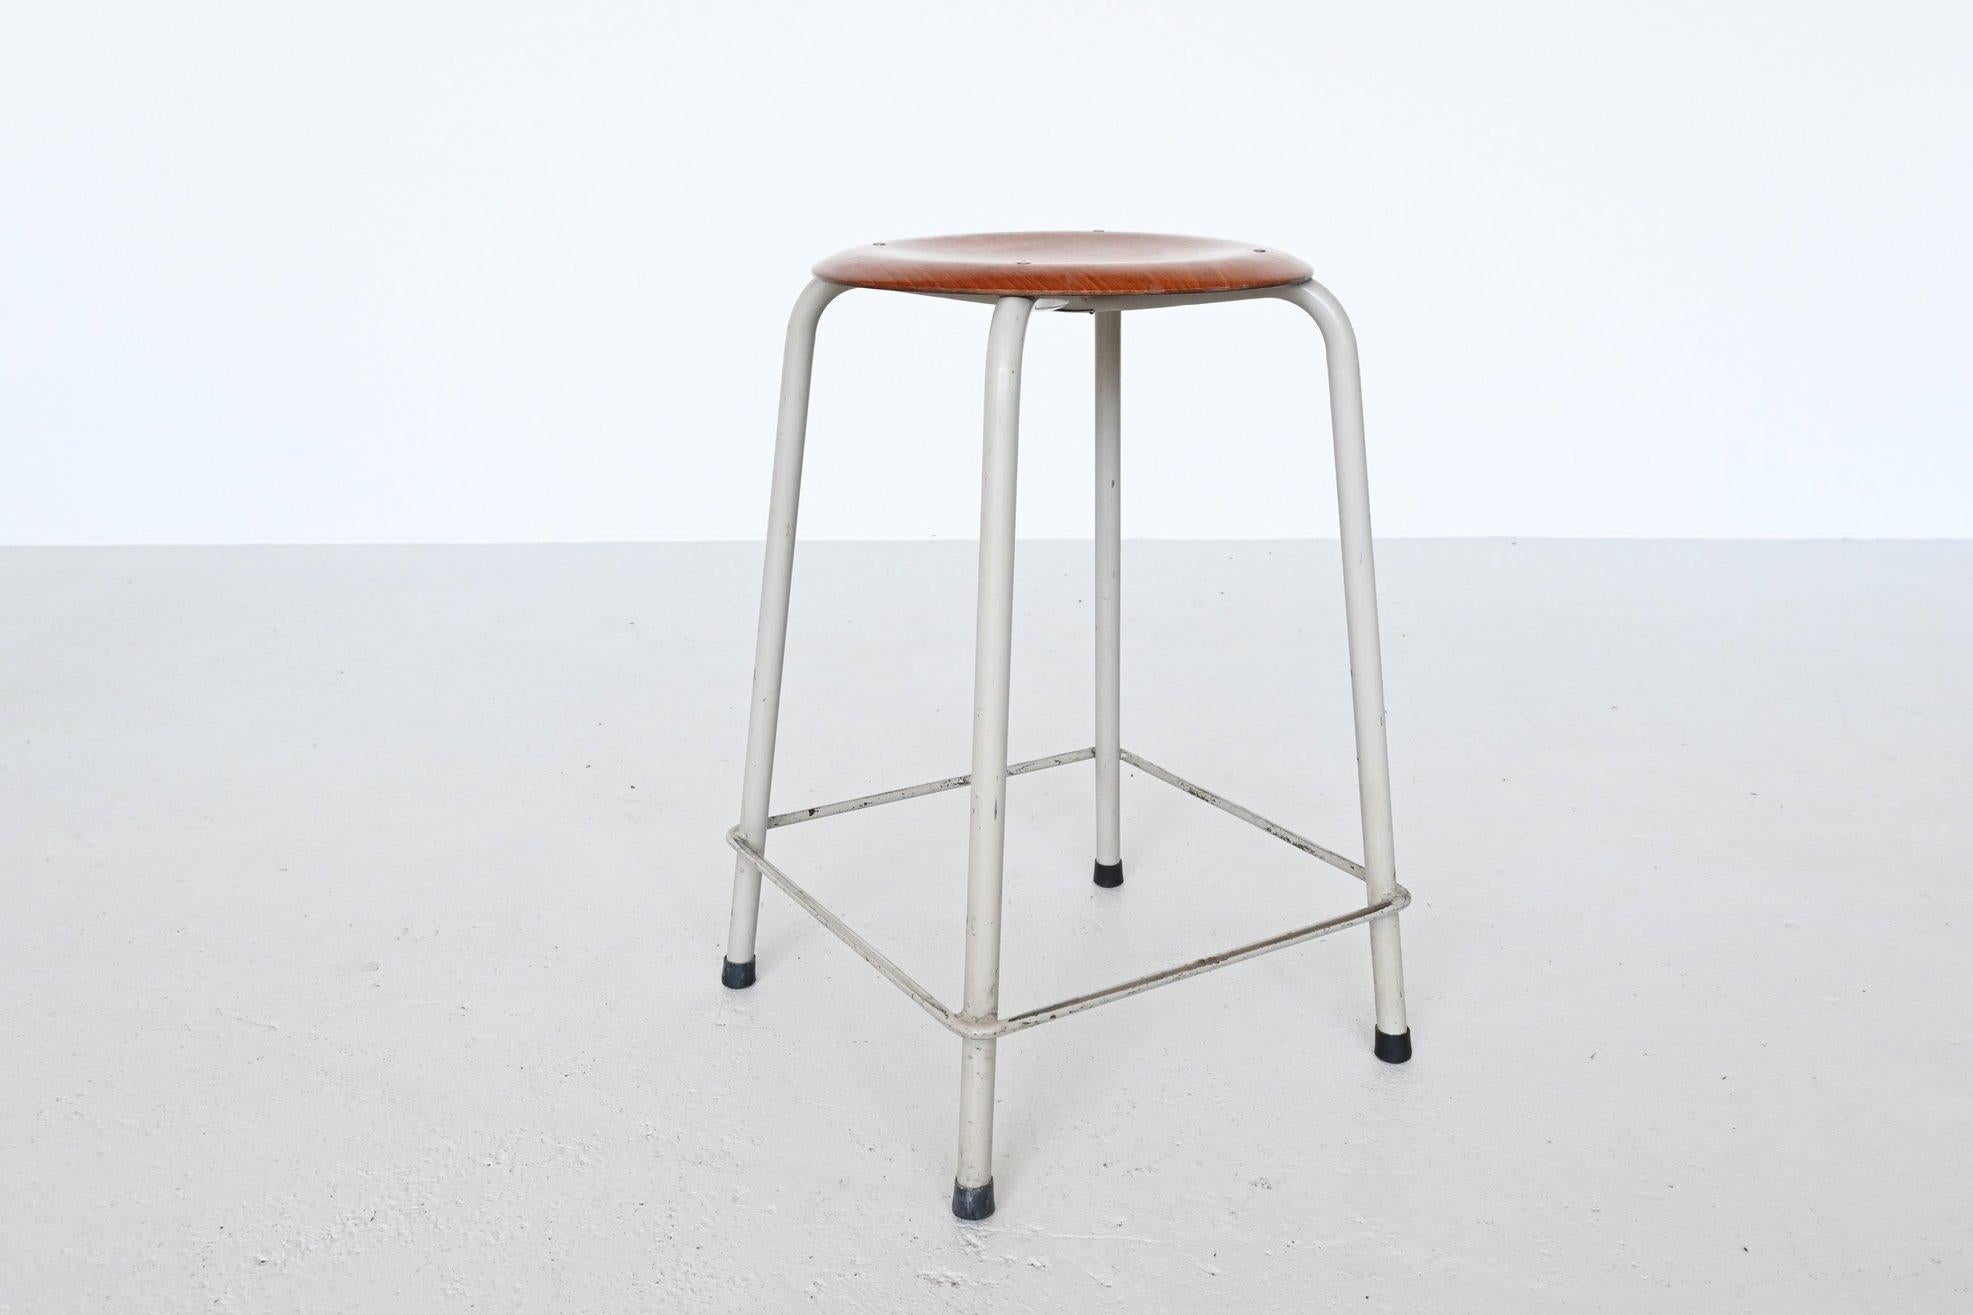 Late 20th Century Ahrend de Cirkel Industrial Stools, the Netherlands, 1970